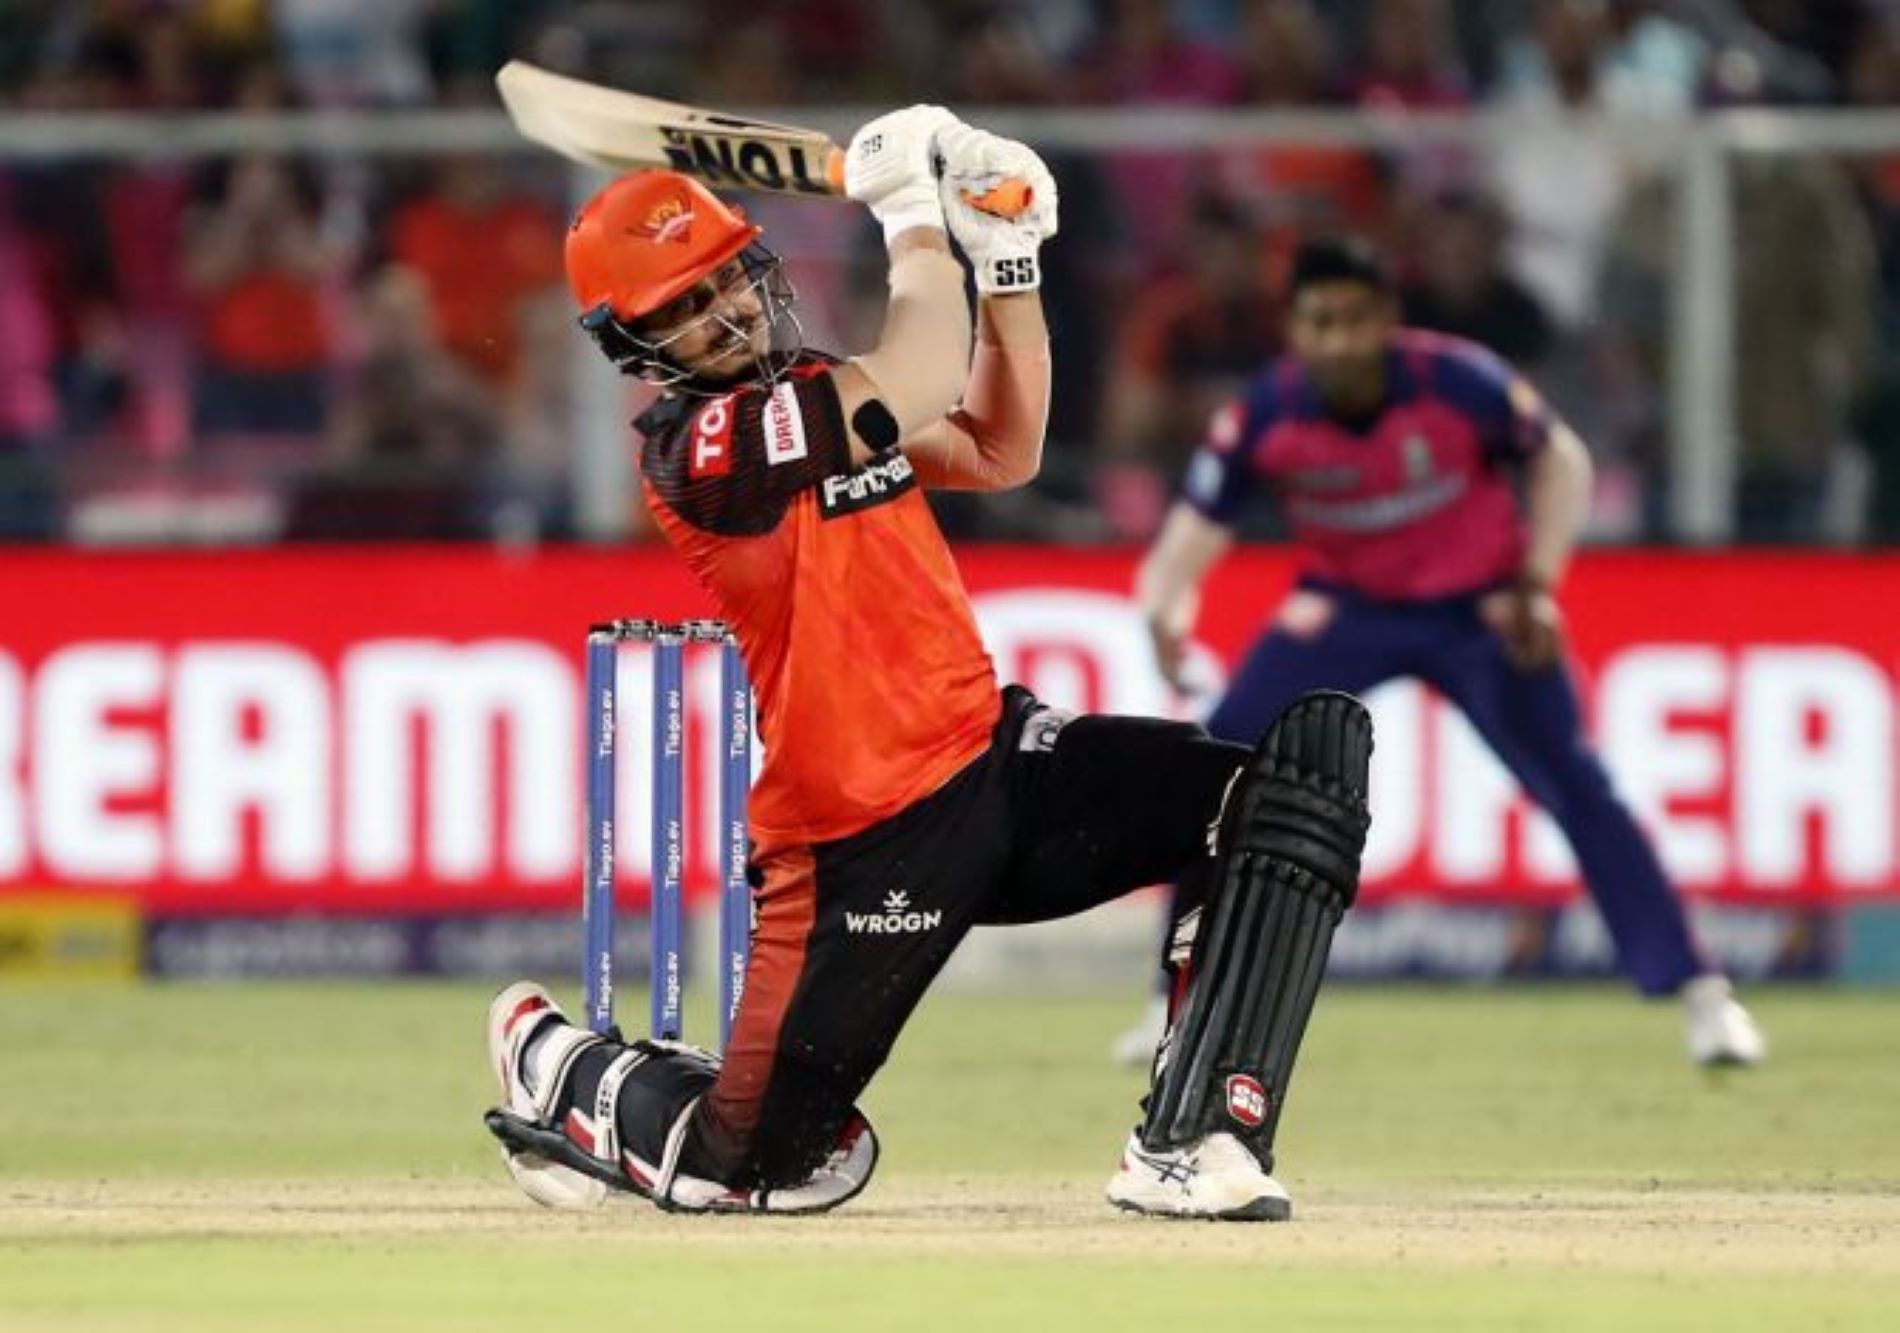 Samad&#039;s explosive batting could help SRH win close games.